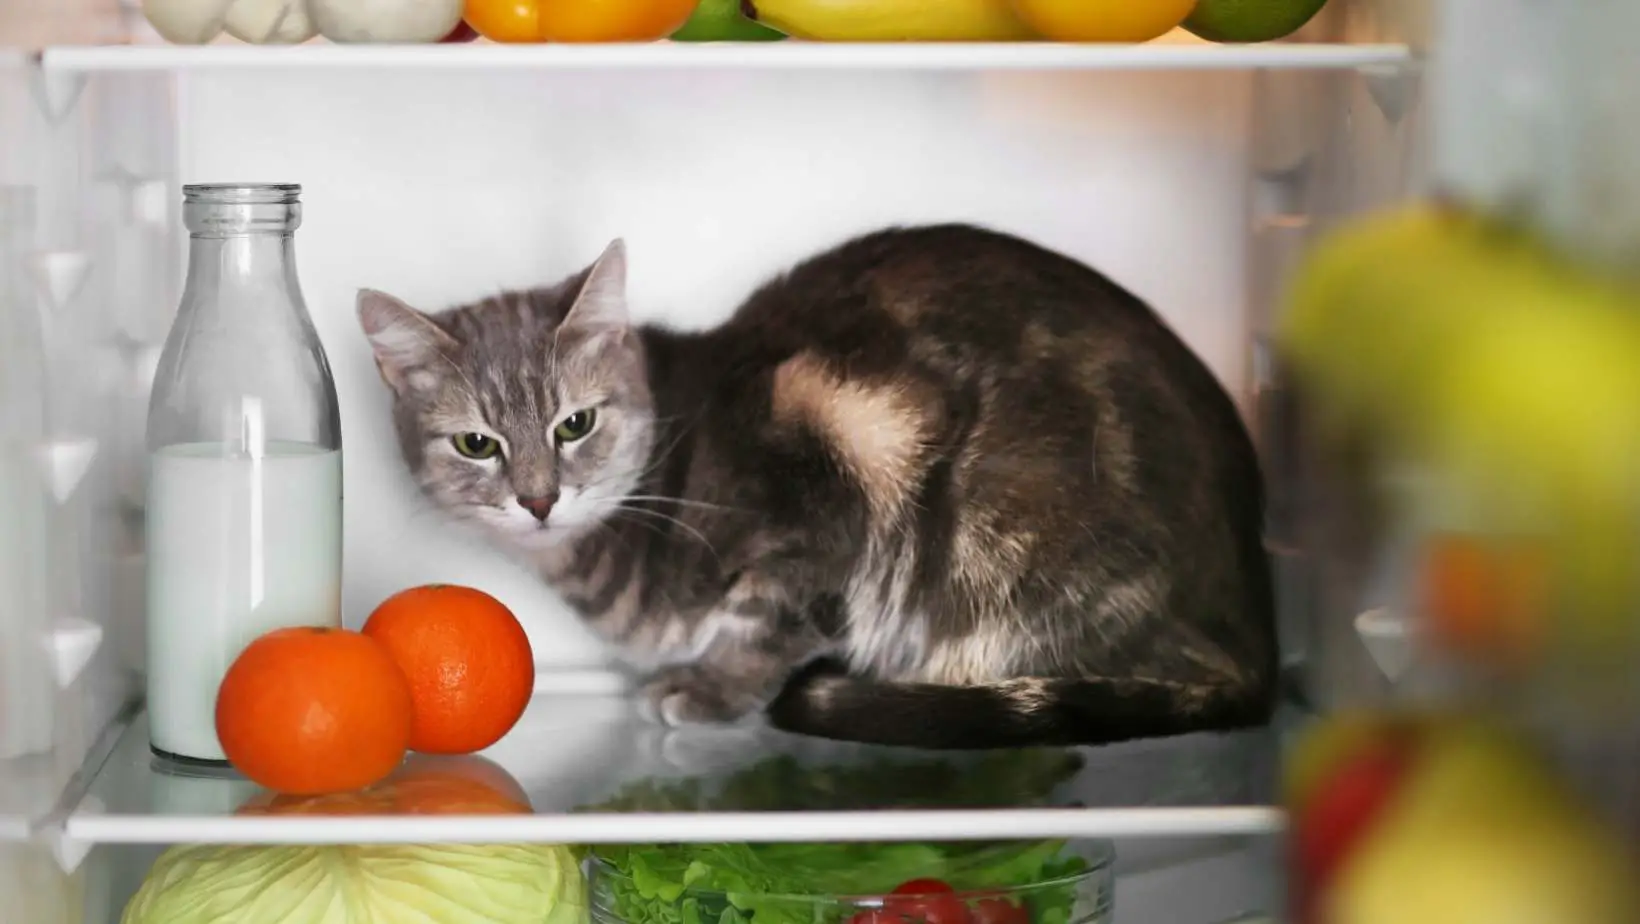 What Can Cats Eat From the Fridge?